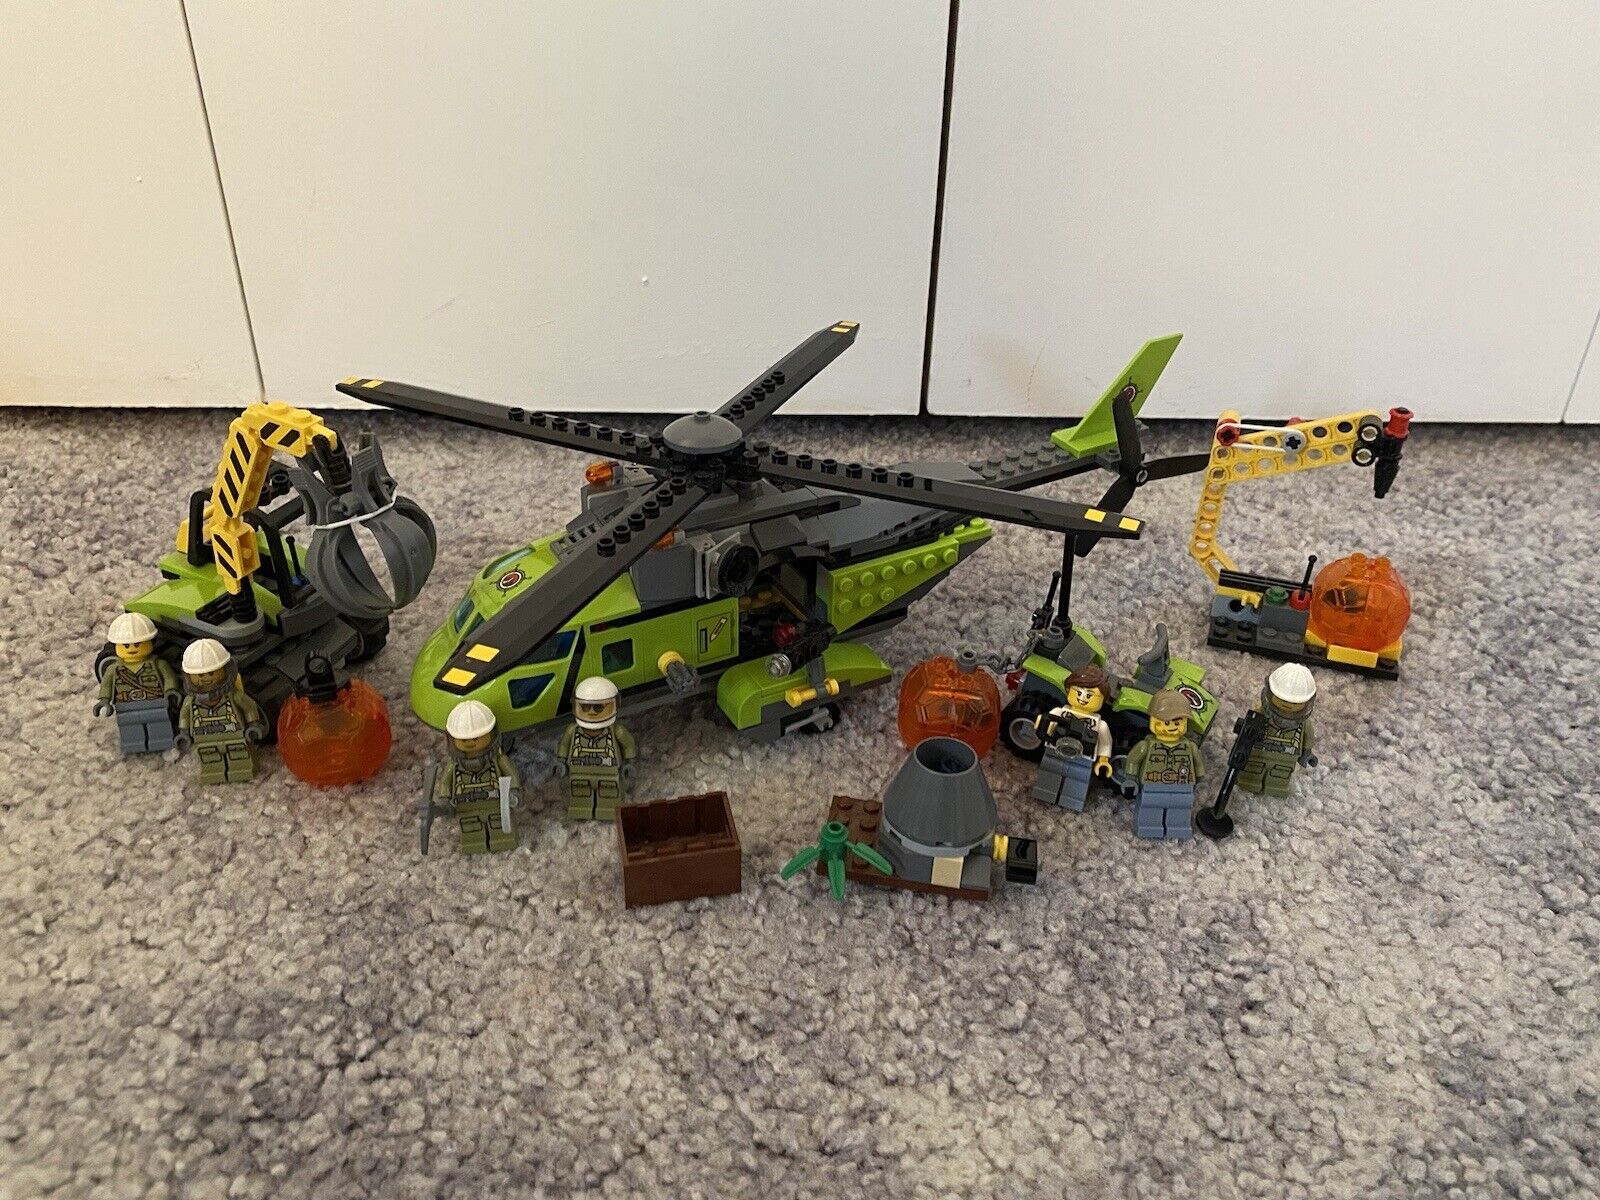 LEGO City Volcano Supply Helicopter 60123 and Volcano Starter Set 60120